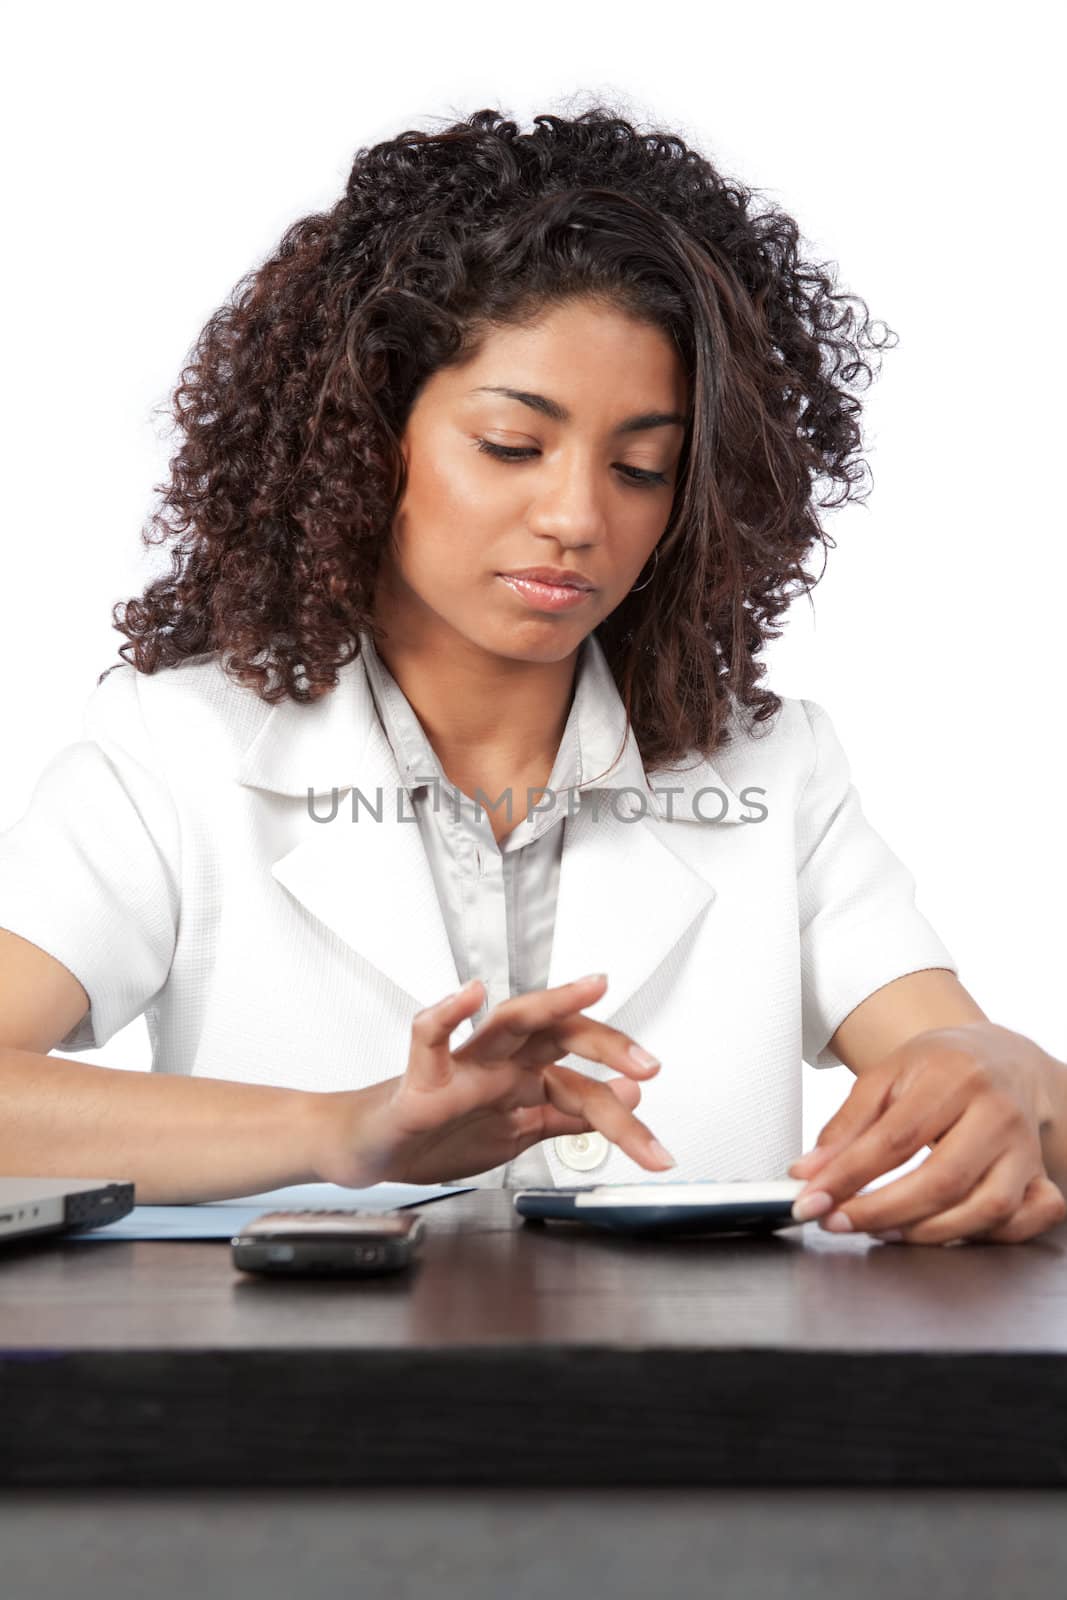 Portrait of female doctor using digital tablet at work isolated on white background.